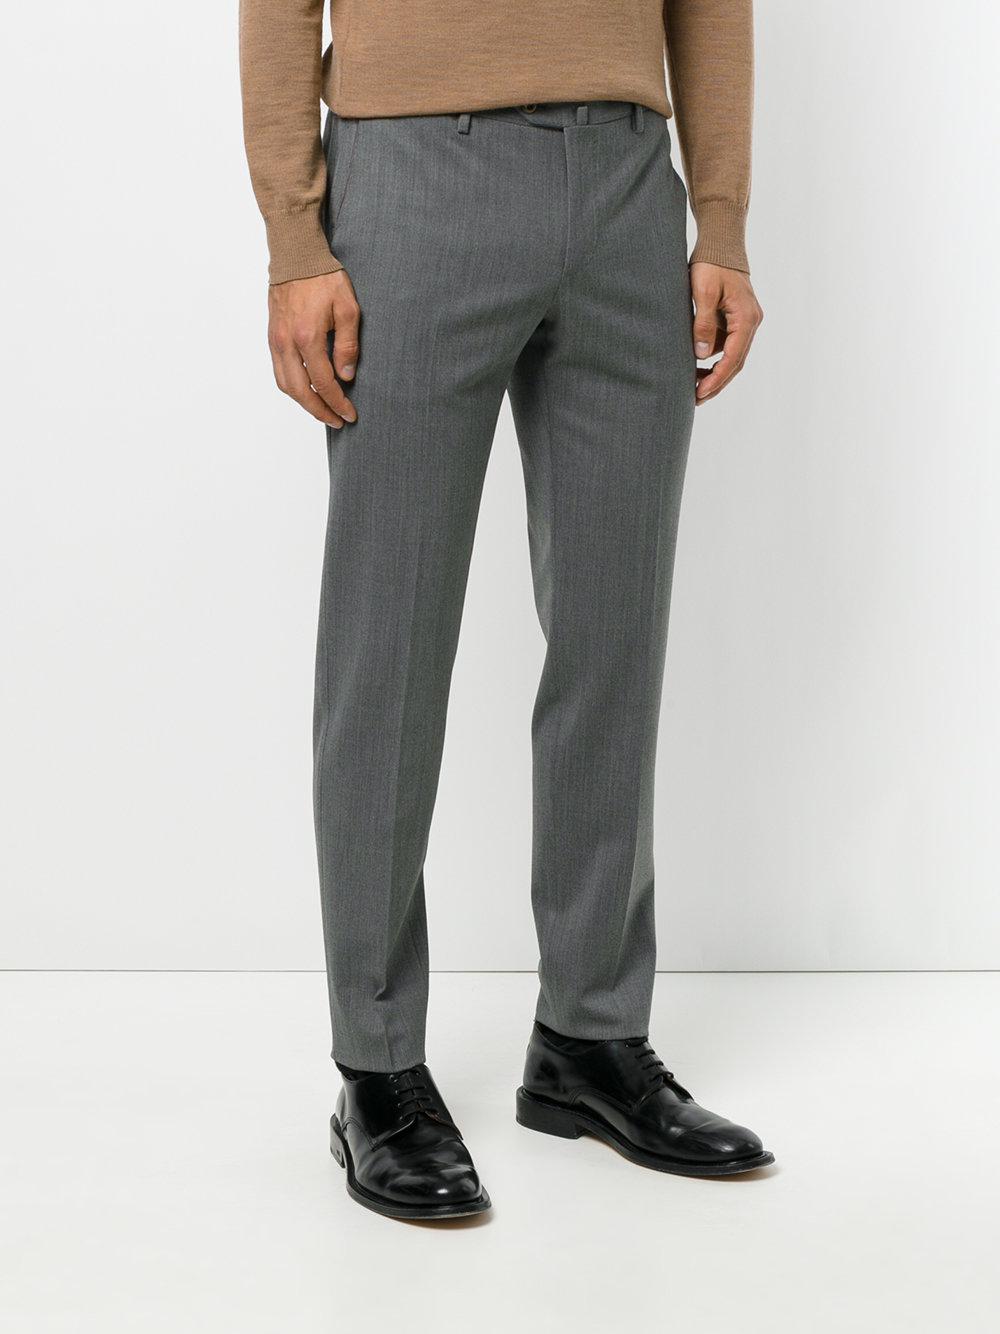 Lyst - Pt01 Fitted Tailored Trousers in Gray for Men